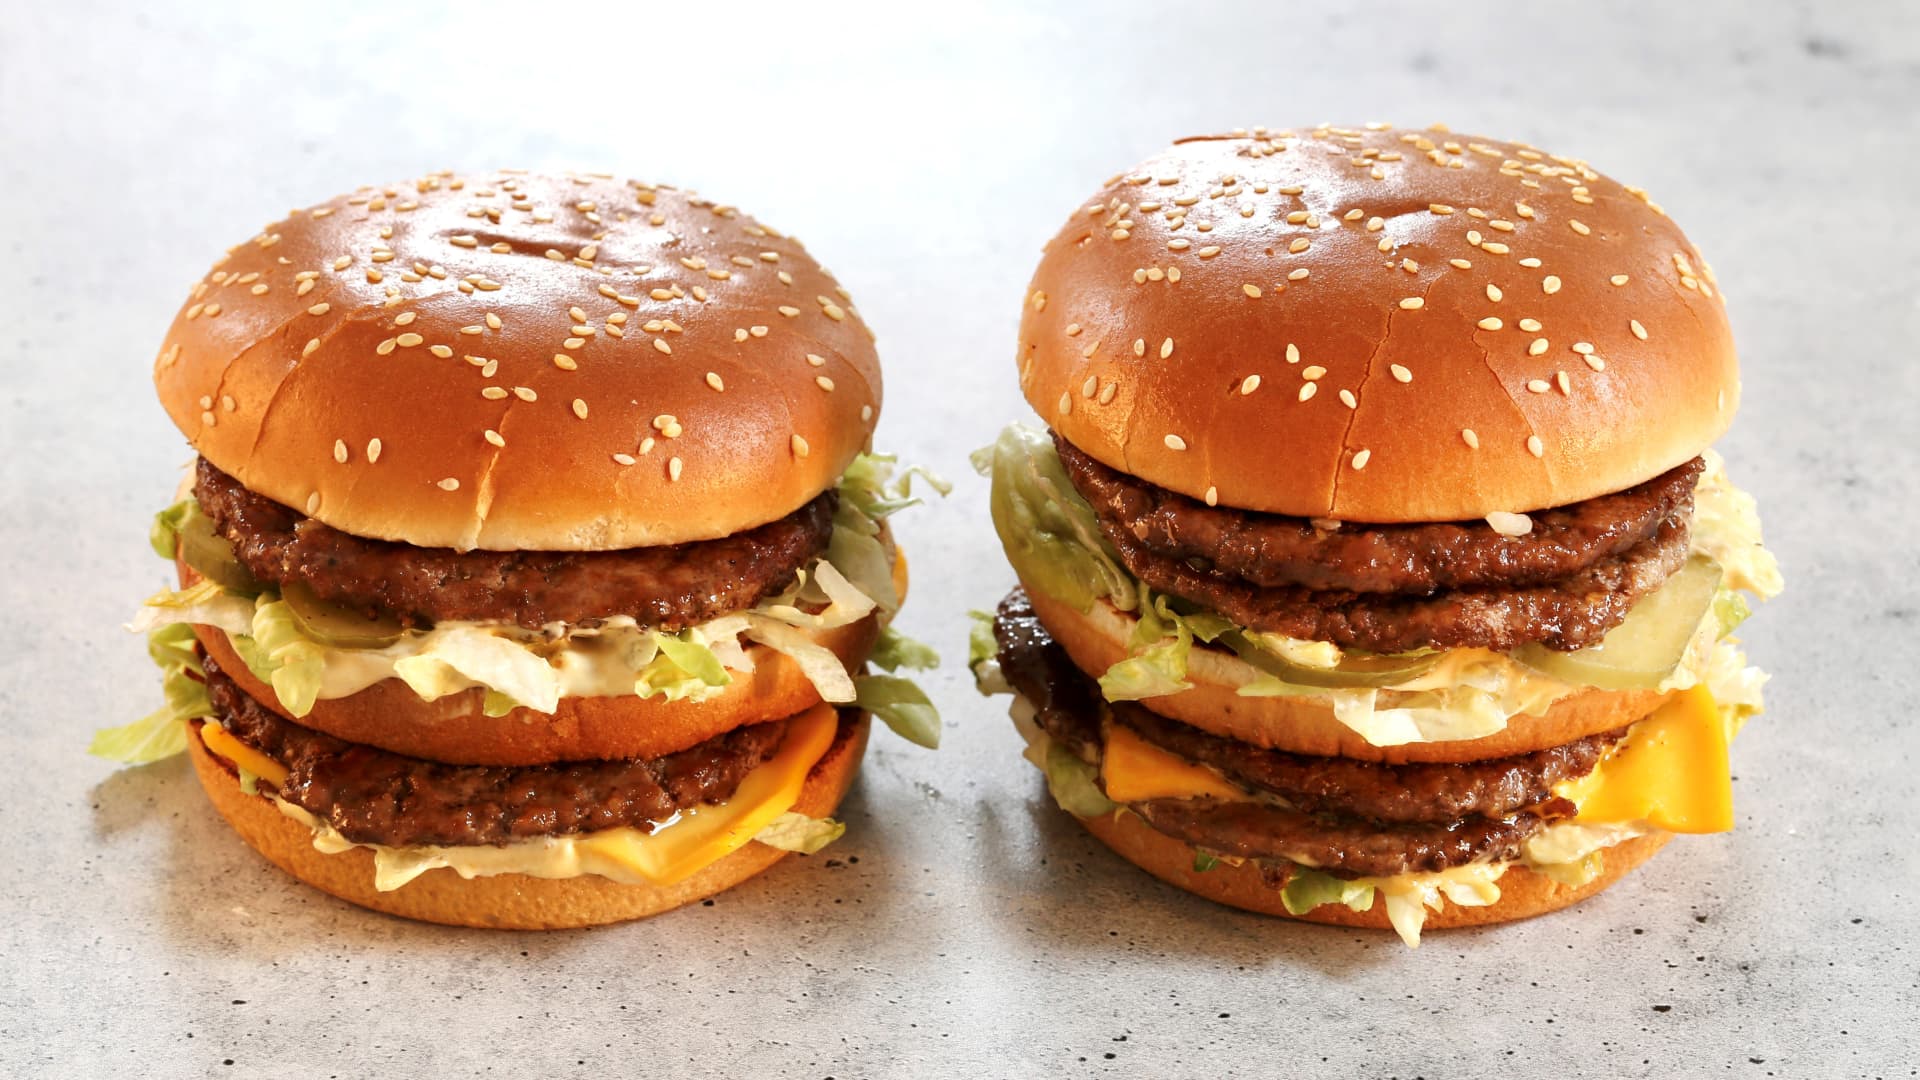 McDonald’s launches ‘Best Burger’ ahead of earnings report